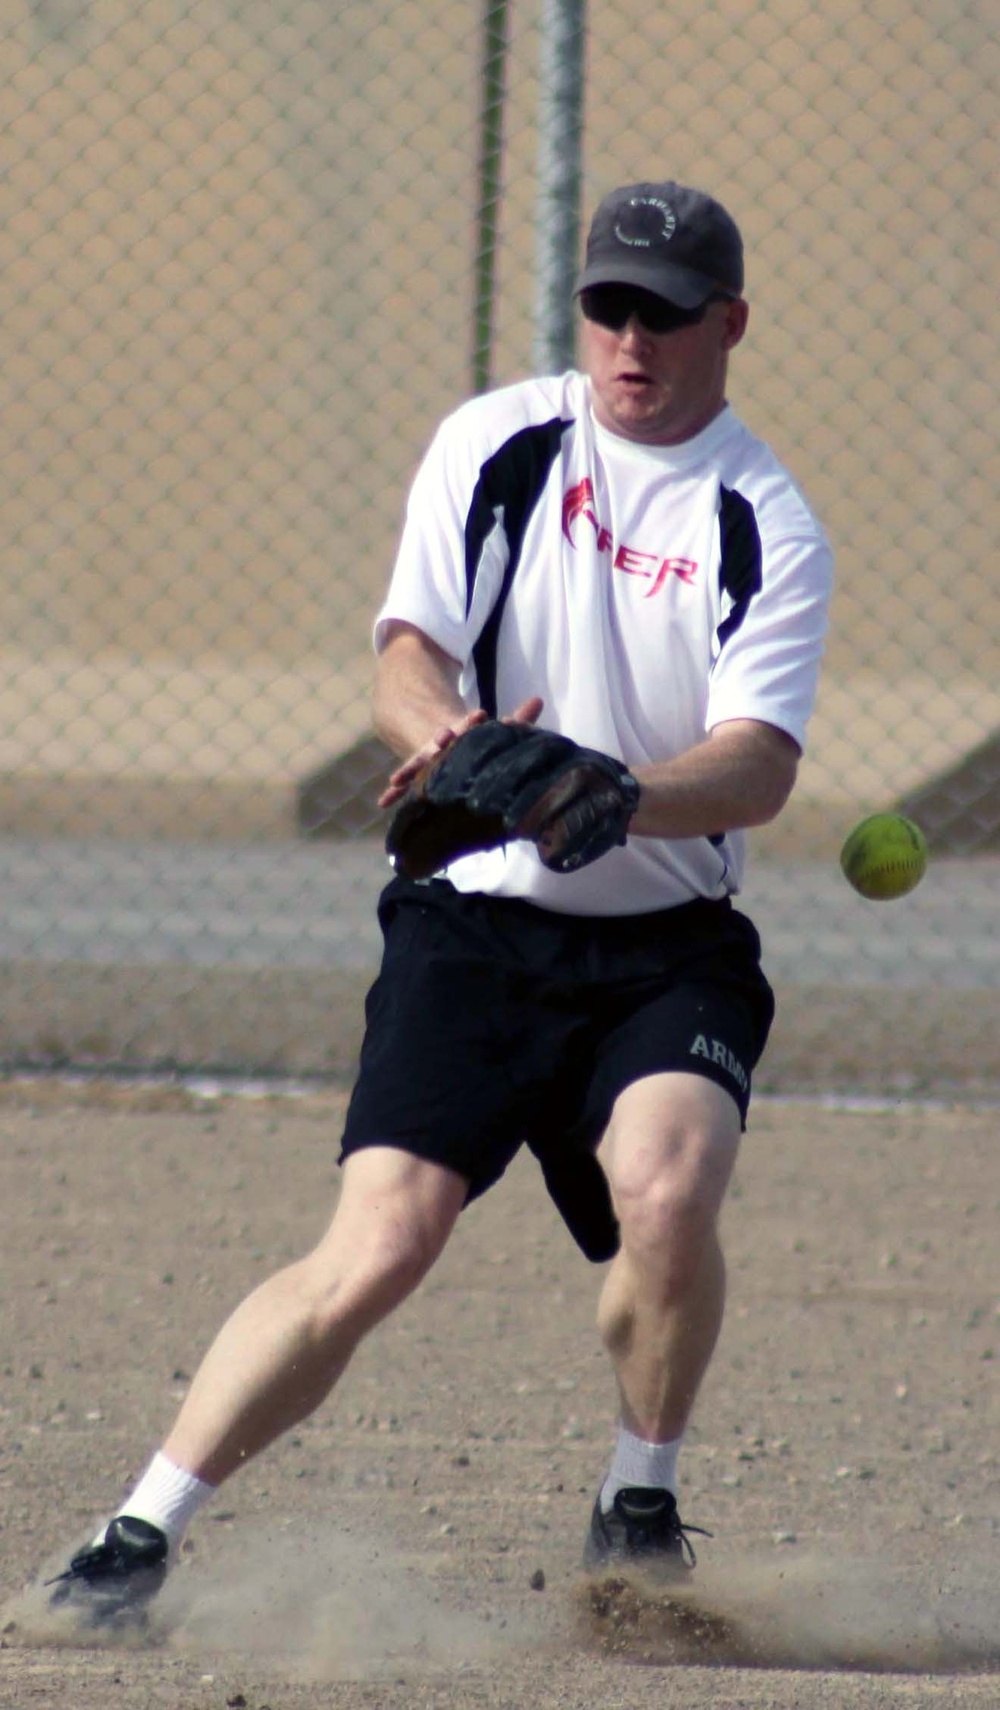 Soldier finds solace in softball while deployed